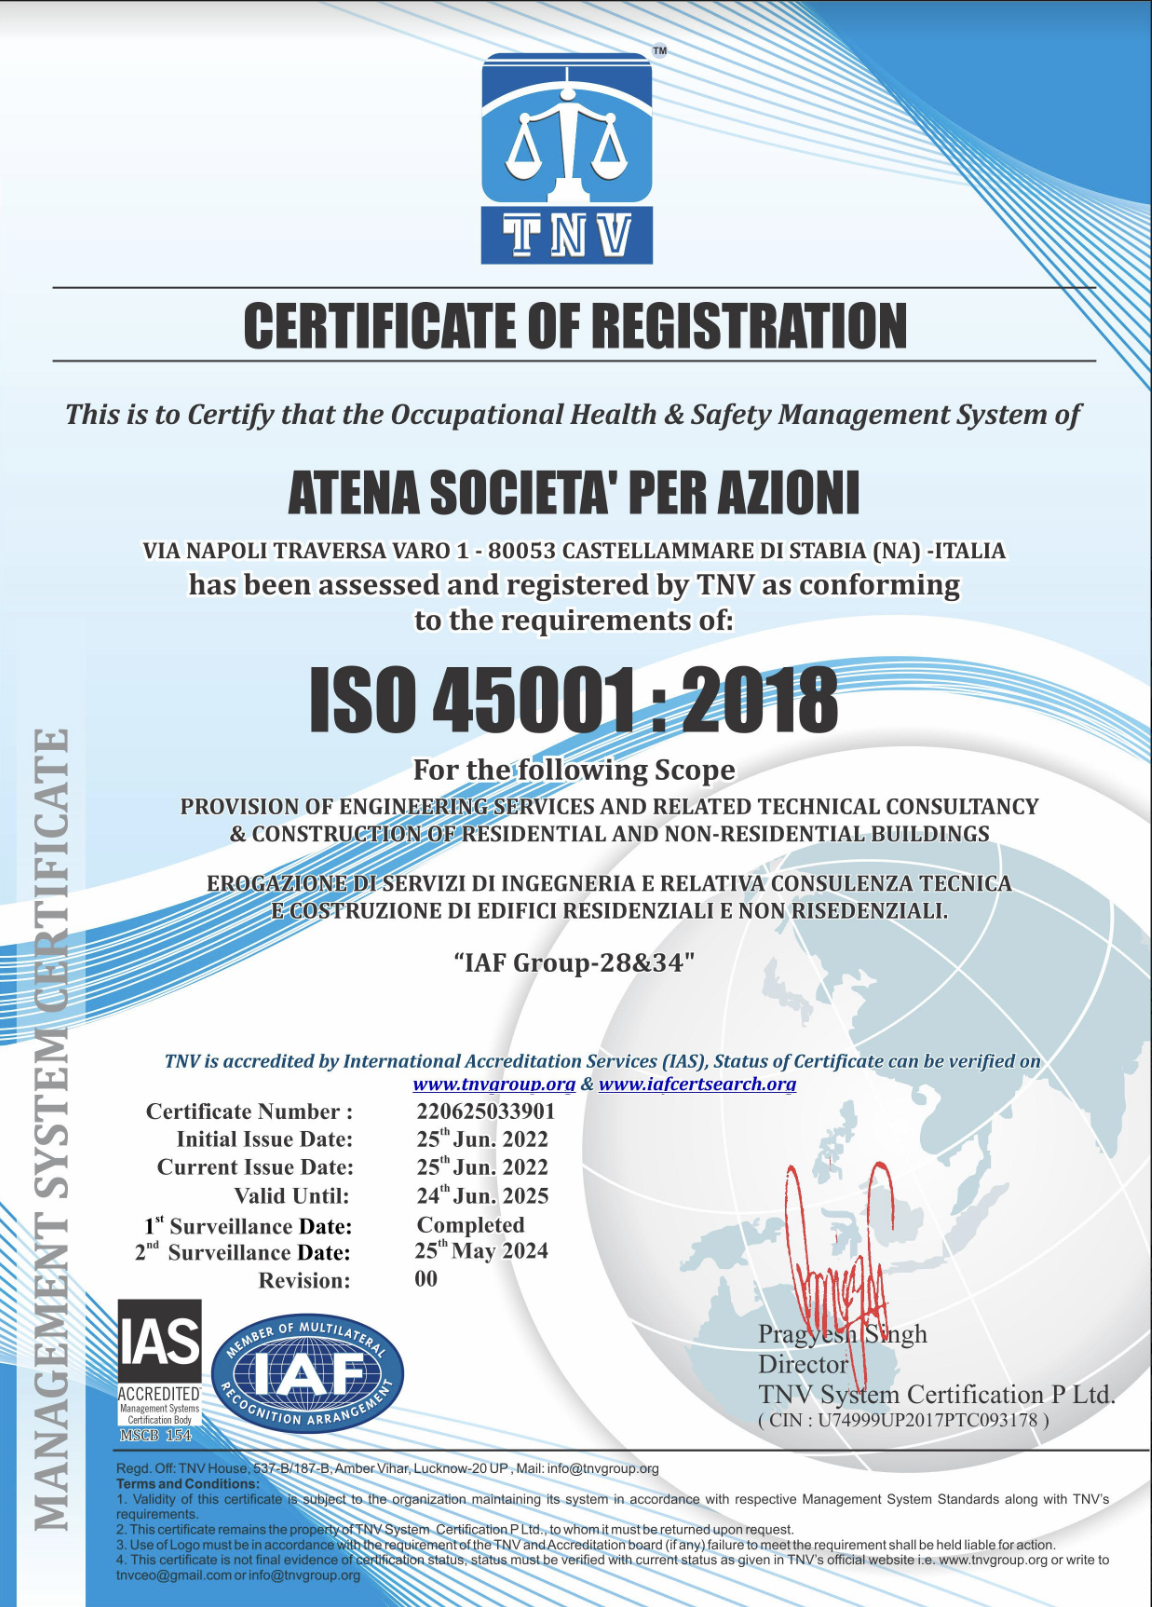 ISO 45001:2018 | OCCUPATIONAL HEALTH & SAFETY MANAGEMENT SYSTEM